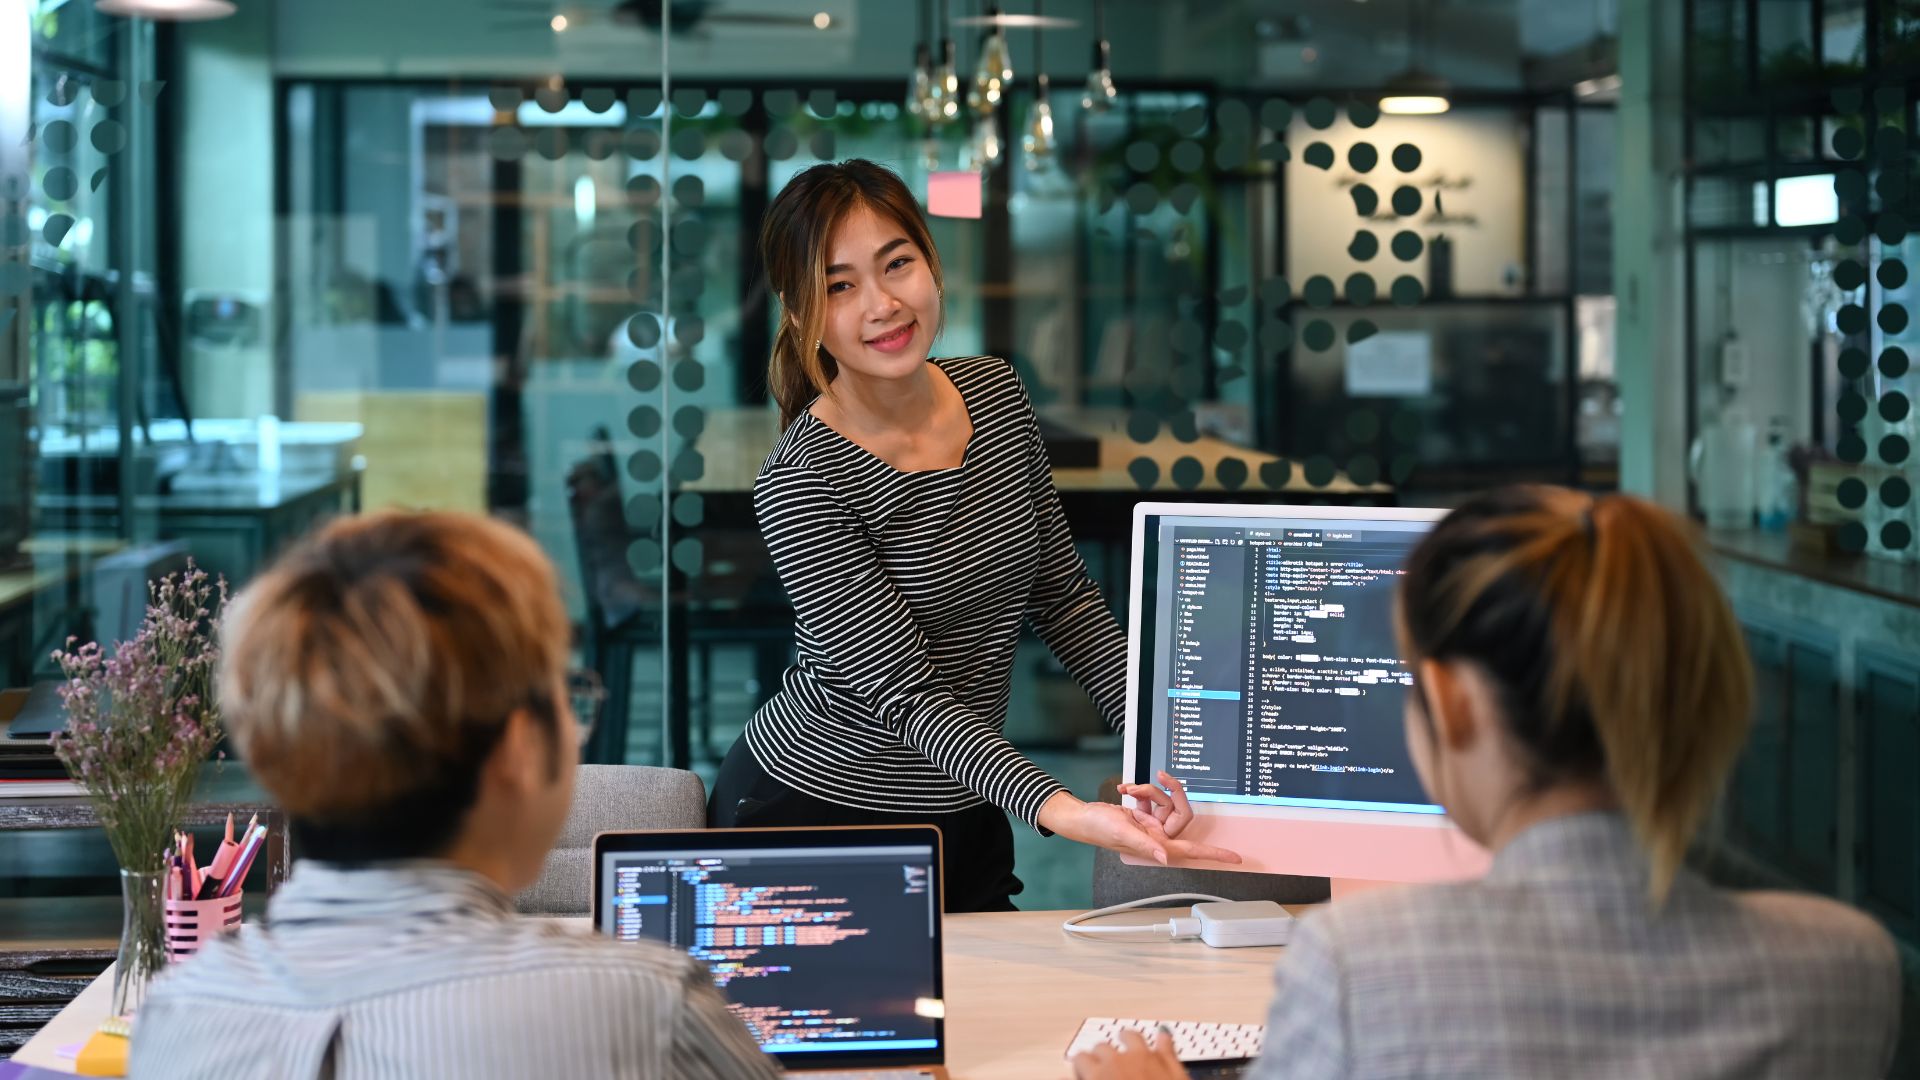 A woman wearing a black and white striped long-sleeved shirt is presenting about the web development team's performance using a Mac monitor in an office space located in a high-rise building.